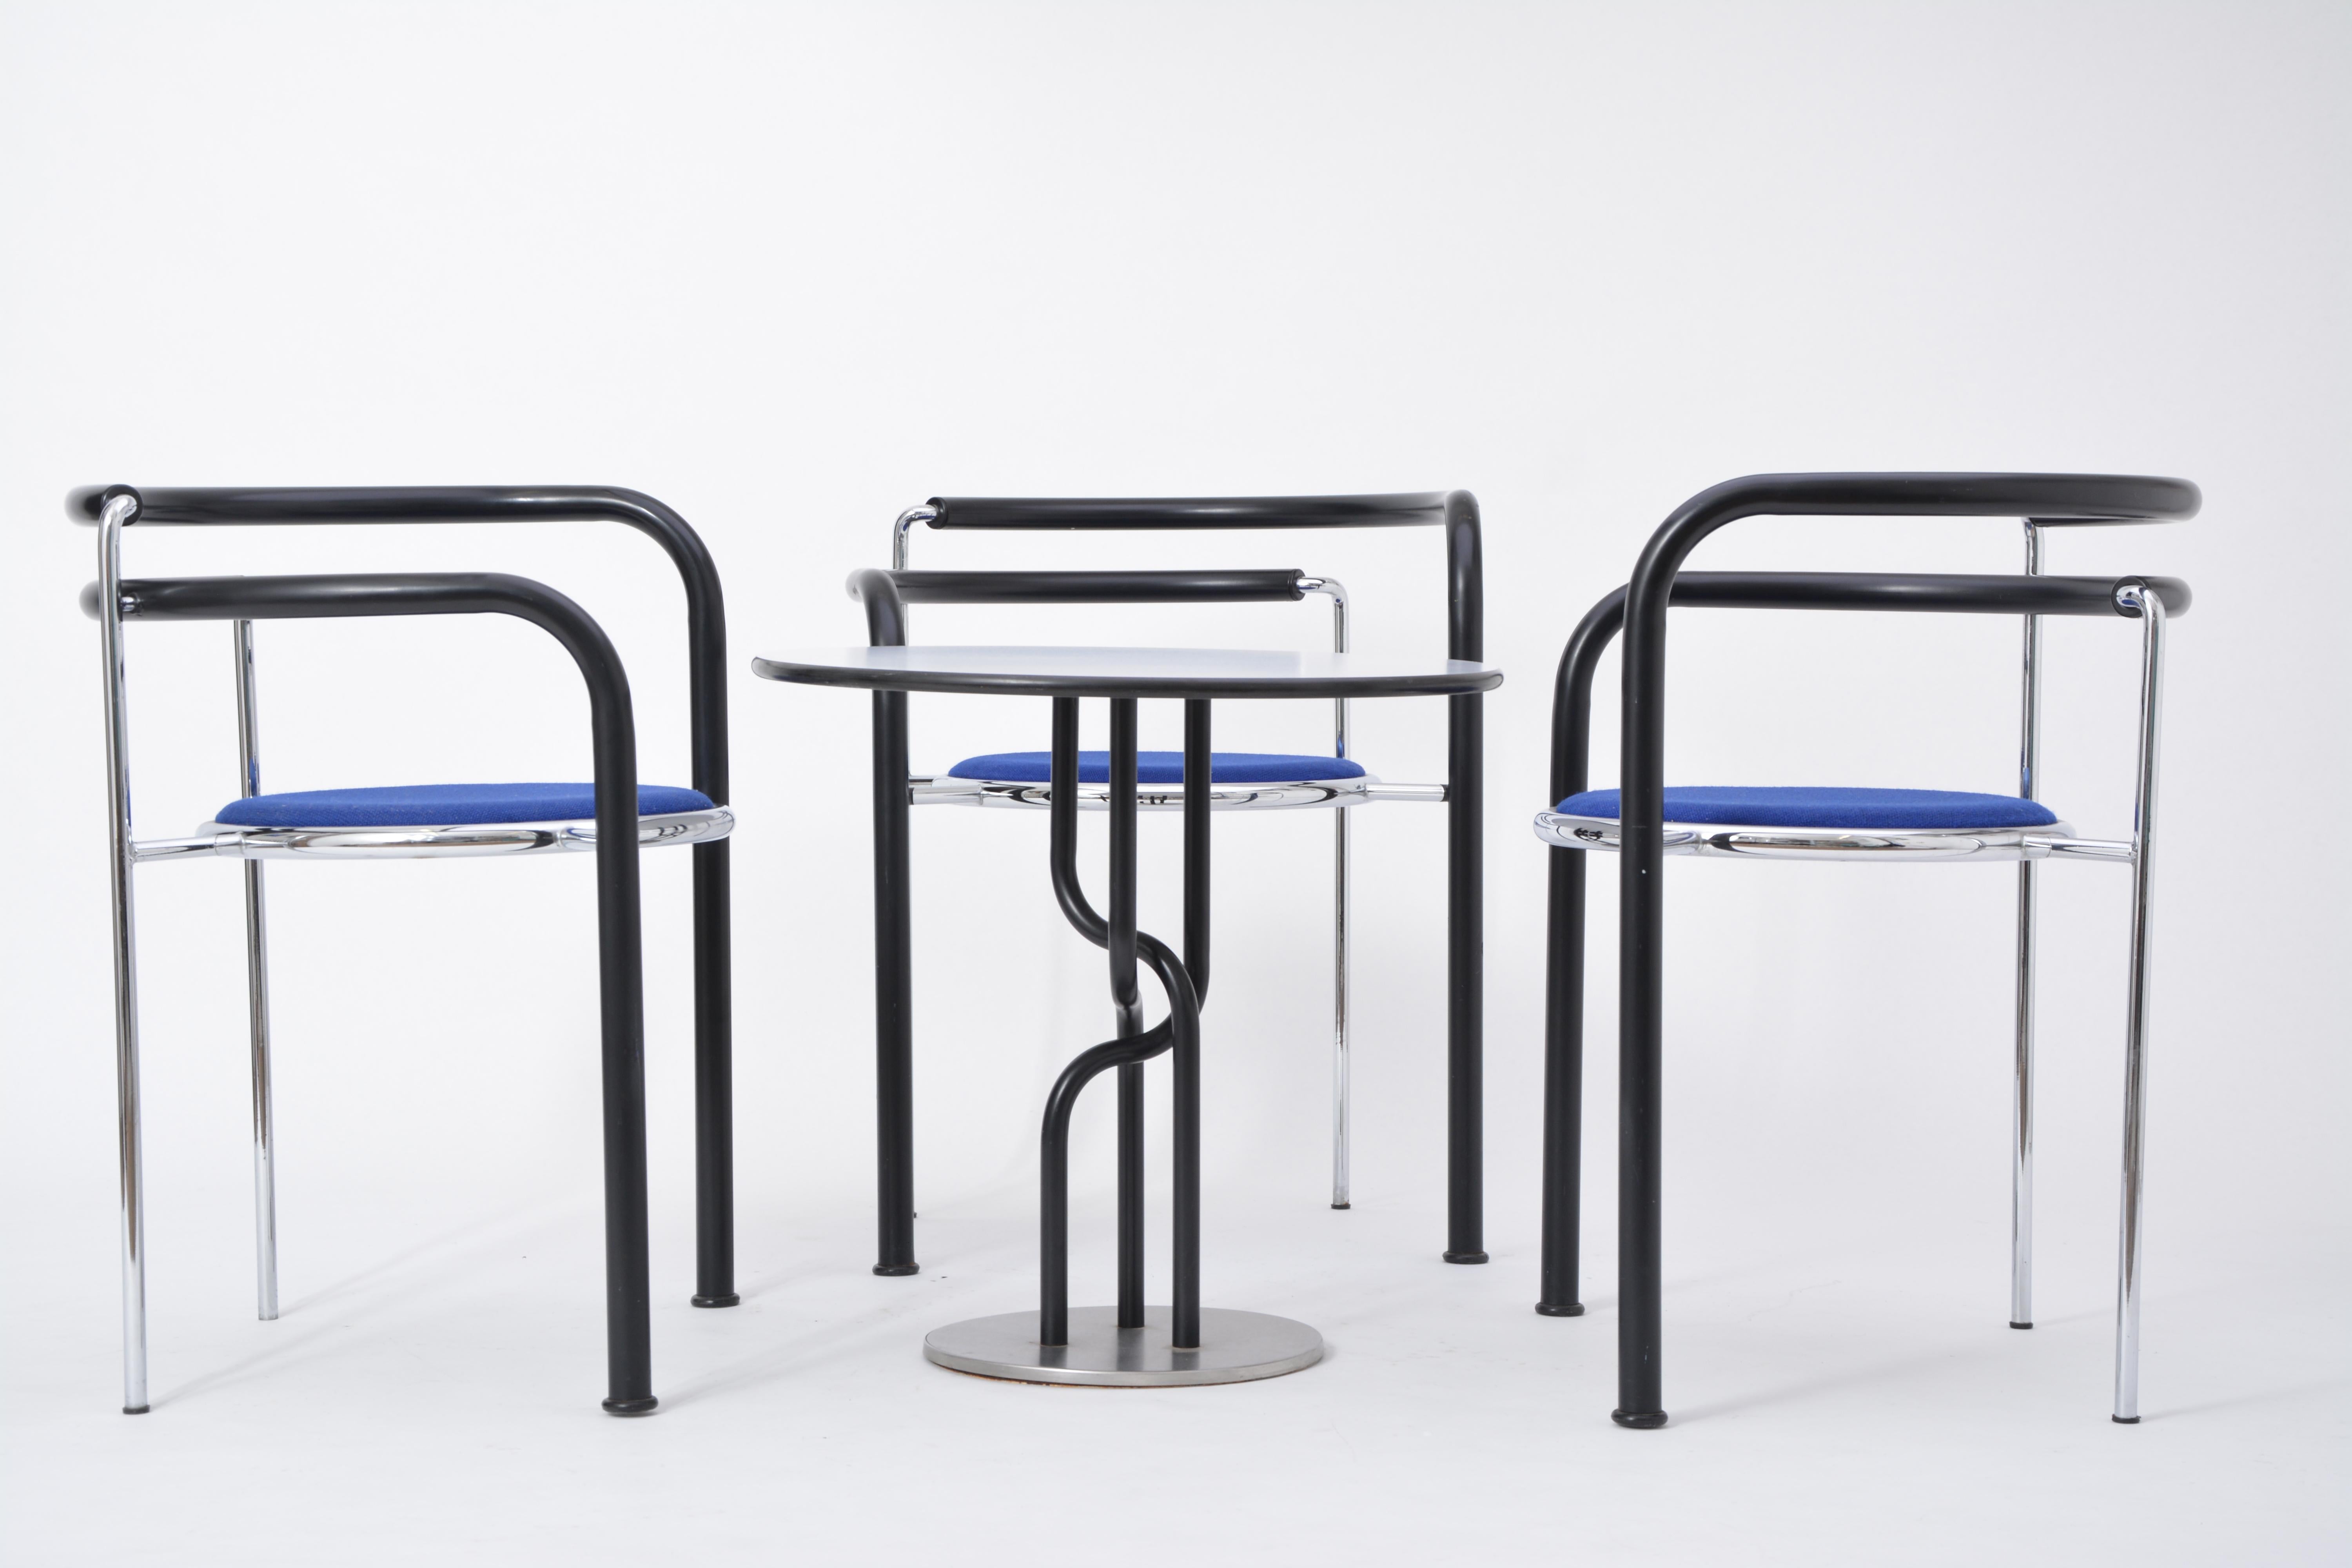 Post-Modern seating group by Rud Thygesen & Johnny Sorensen for Botium, 1989

Table and three stacking chairs 